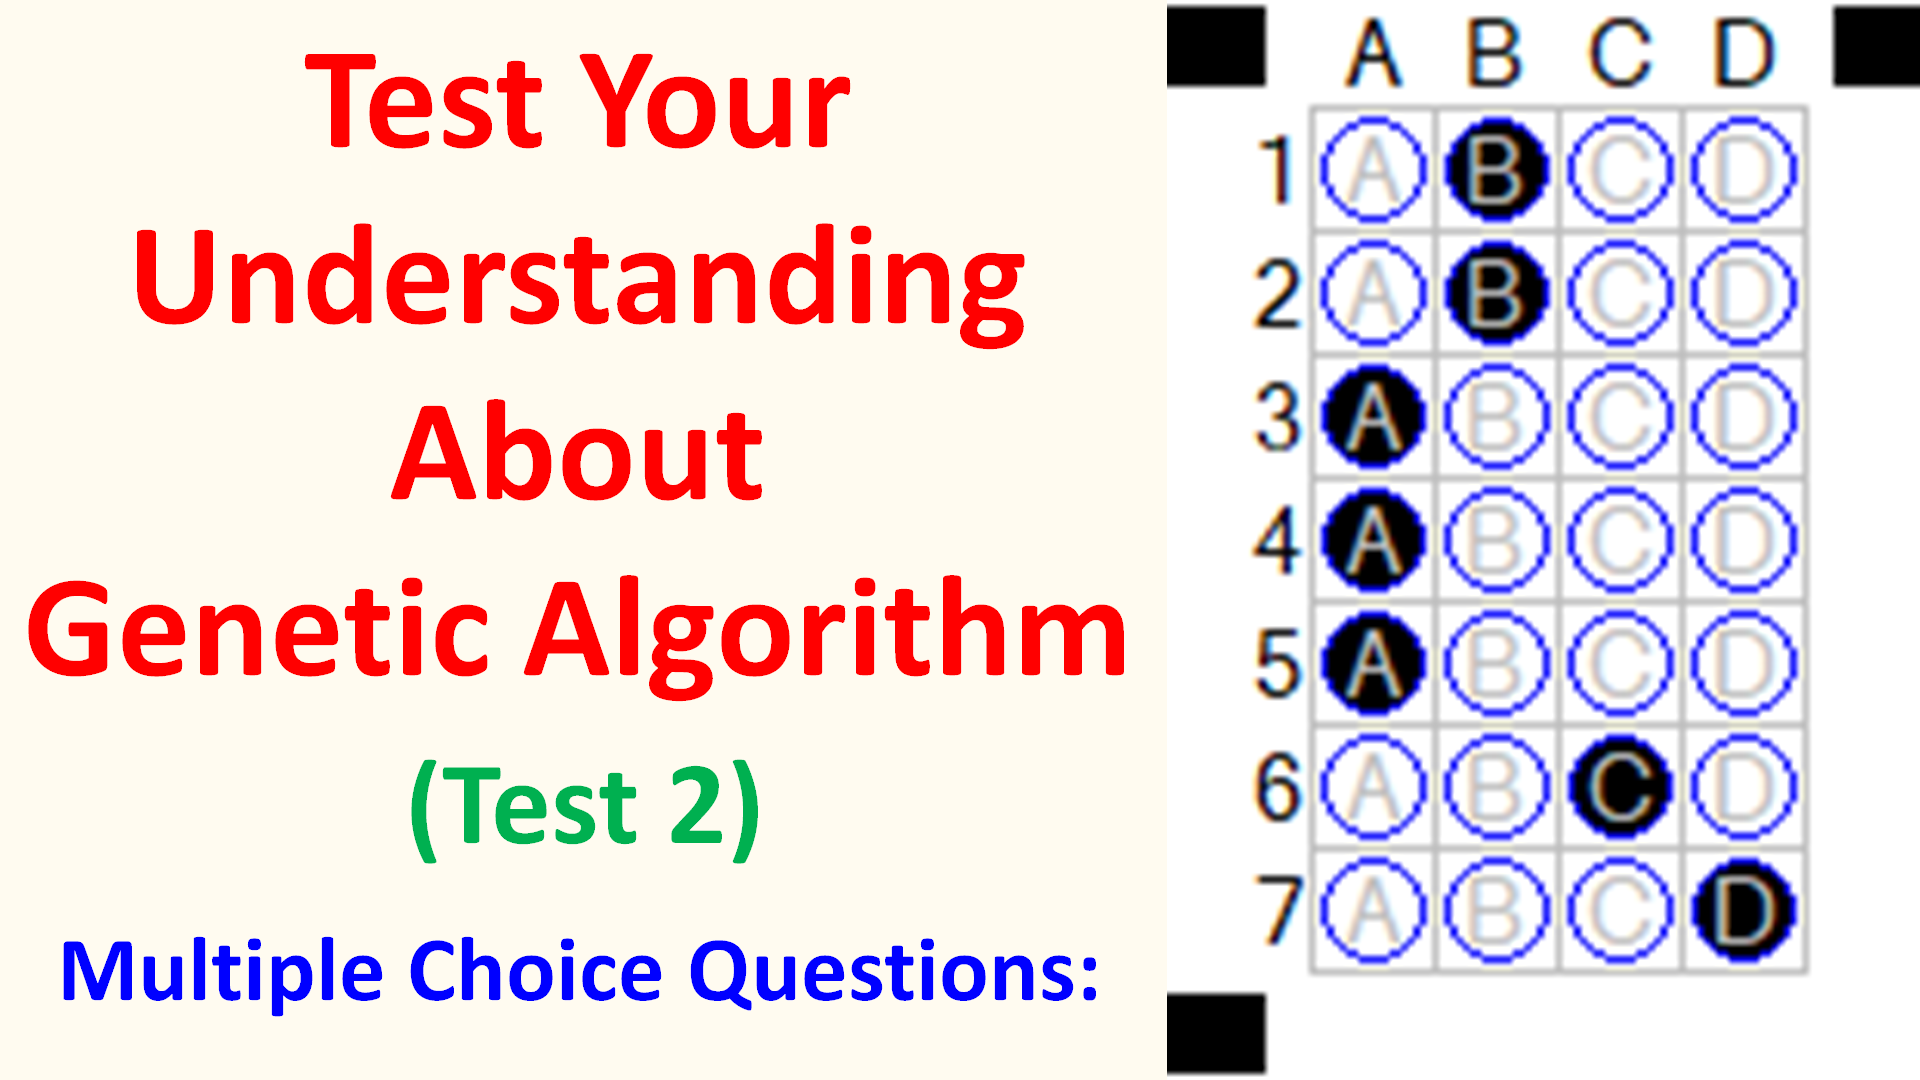 Test Your Understanding About Genetic Algorithm (Test 2)